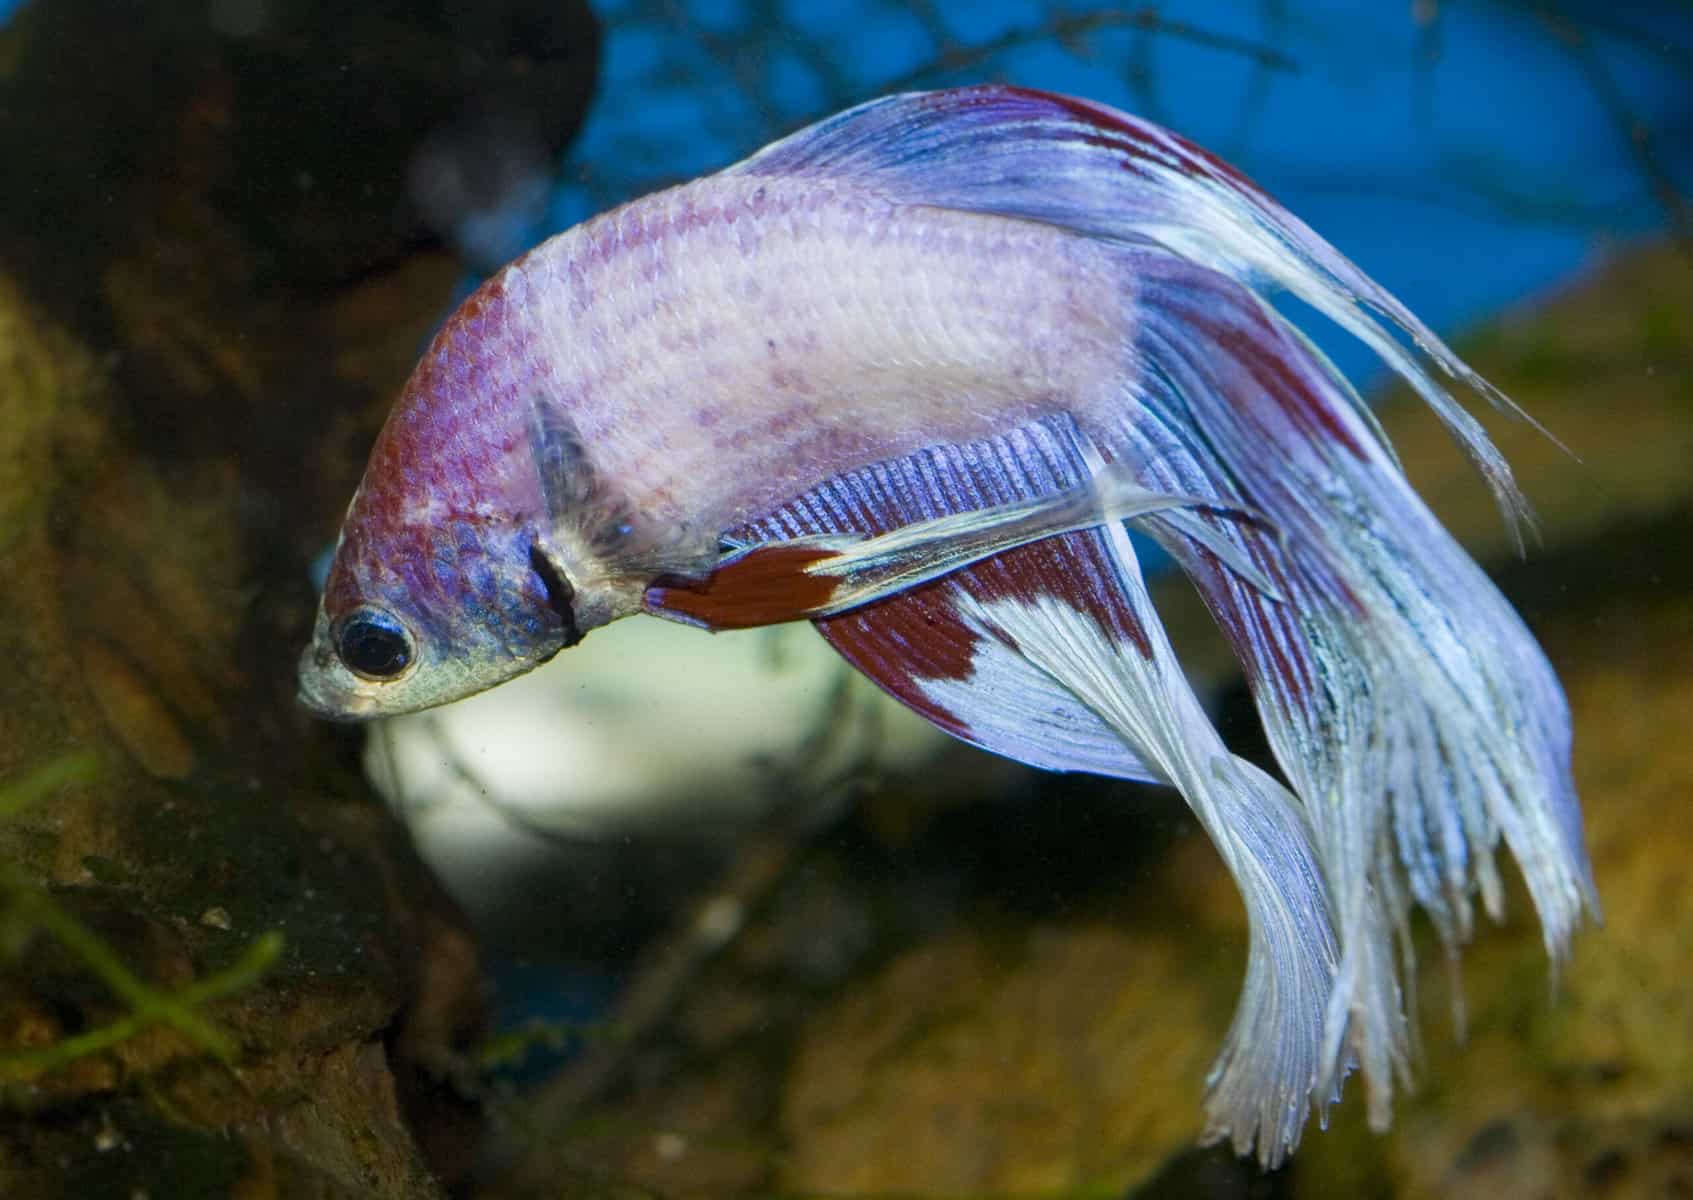 Can Betta Fish Get Depressed? Common Signs To Look For in Your Aquatic Pet